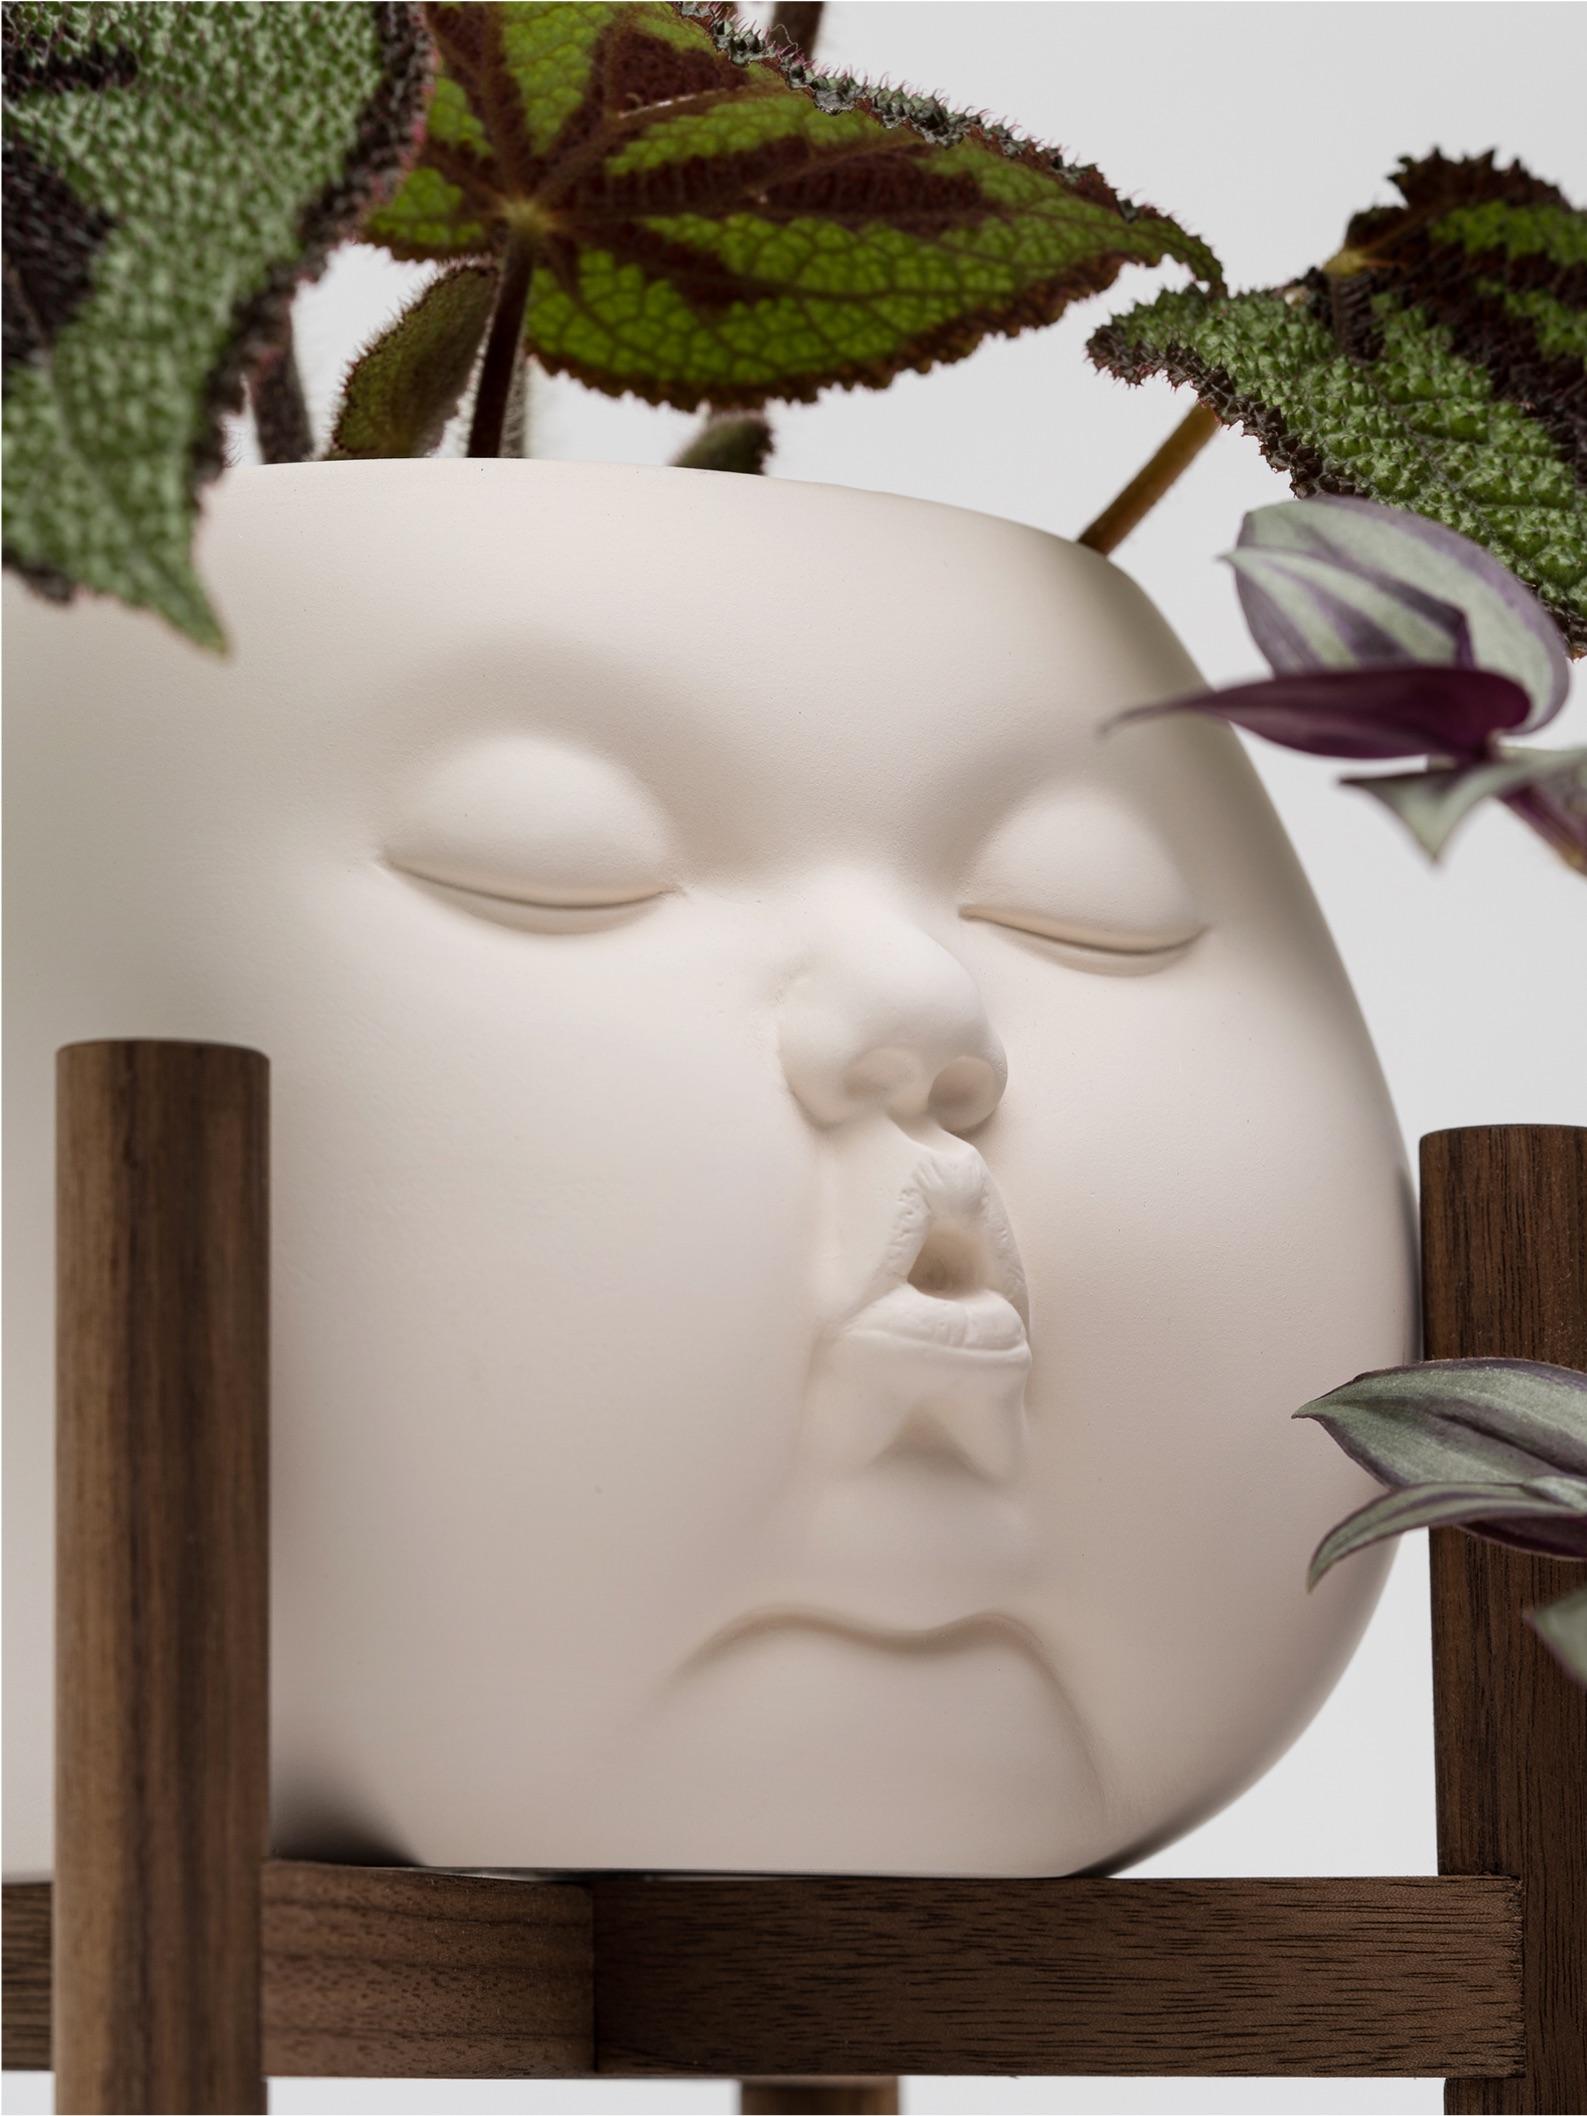 Johnson Tsang
Open Mind (Small), 2022
Ceramic plant pot with glazed interior and bespoke walnut wood stand
5 1/2 × 7 1/2 × 7 1/2 in | 14 × 19.1 × 19.1 cm
